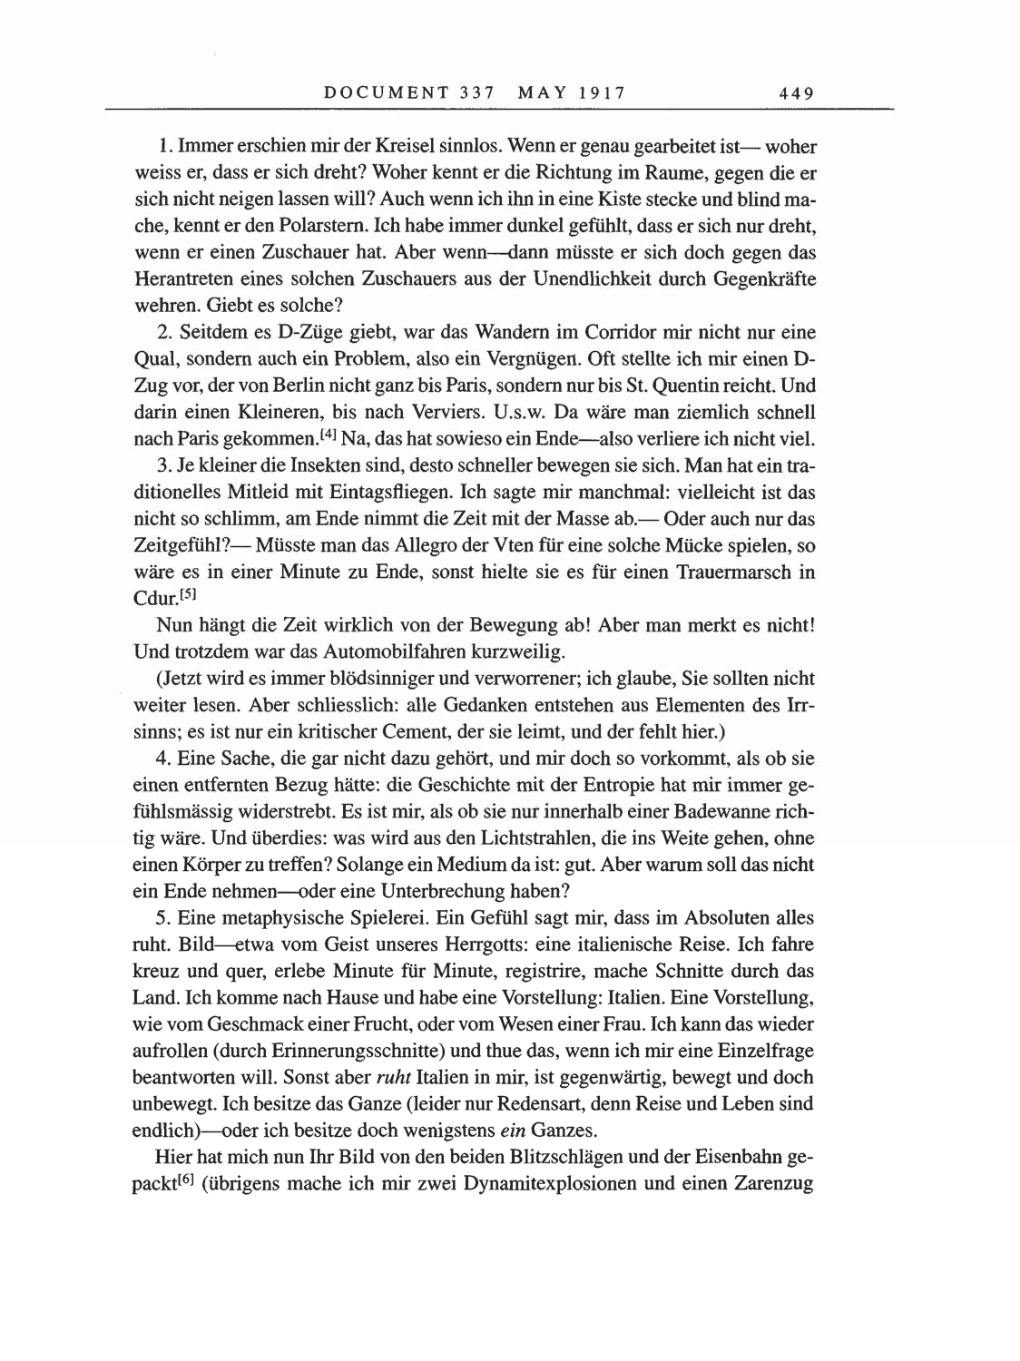 Volume 8, Part A: The Berlin Years: Correspondence 1914-1917 page 449